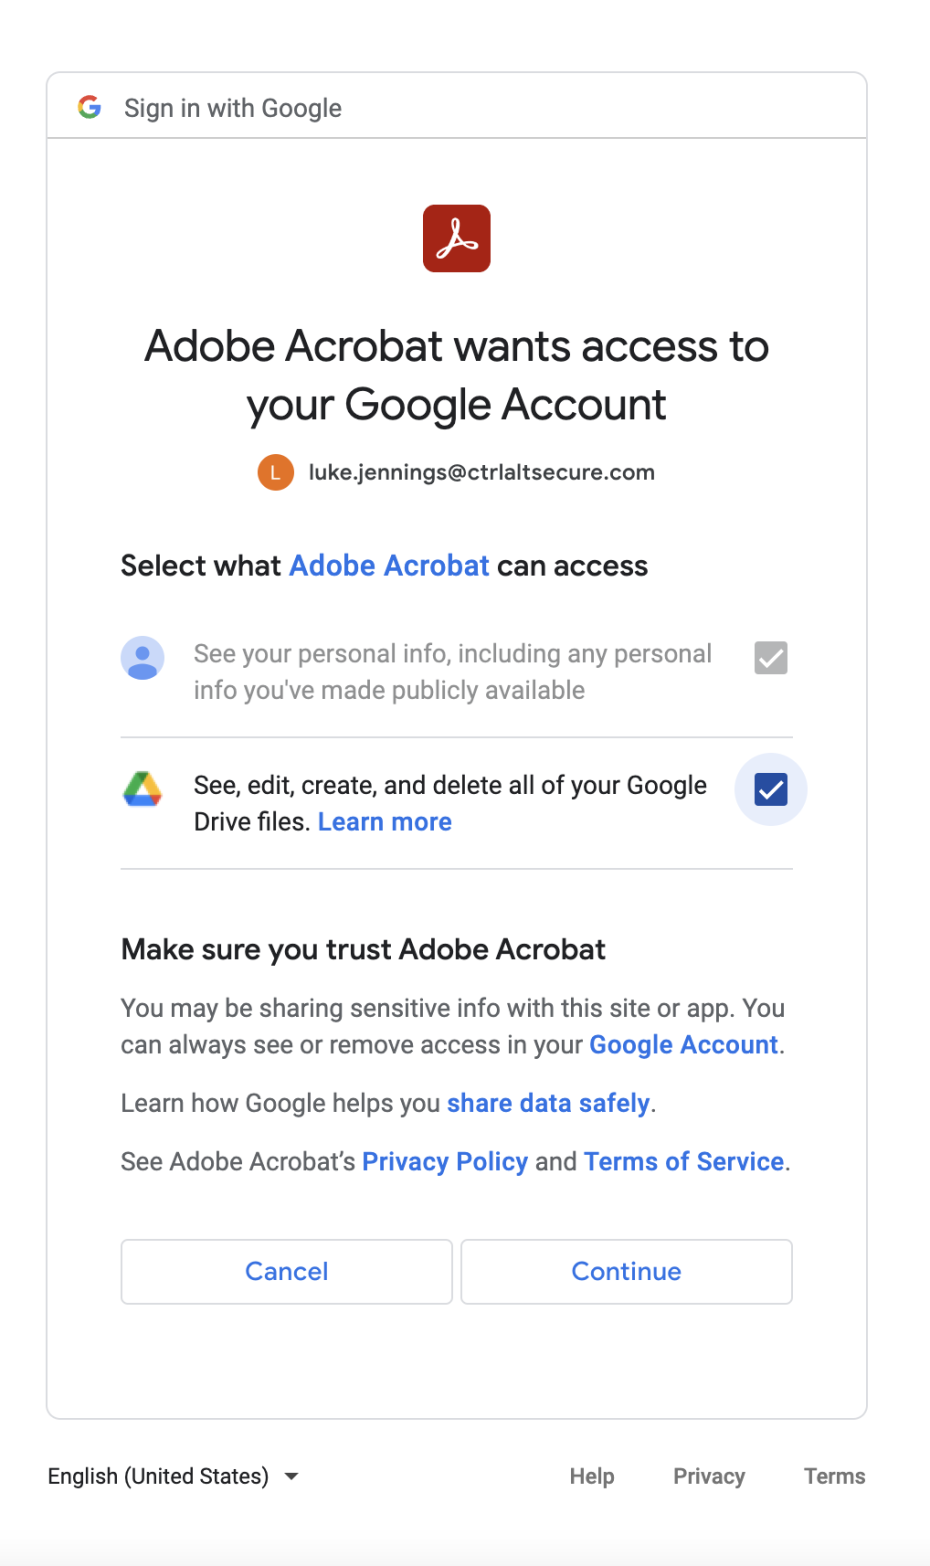 Adobe wants to access your Google account